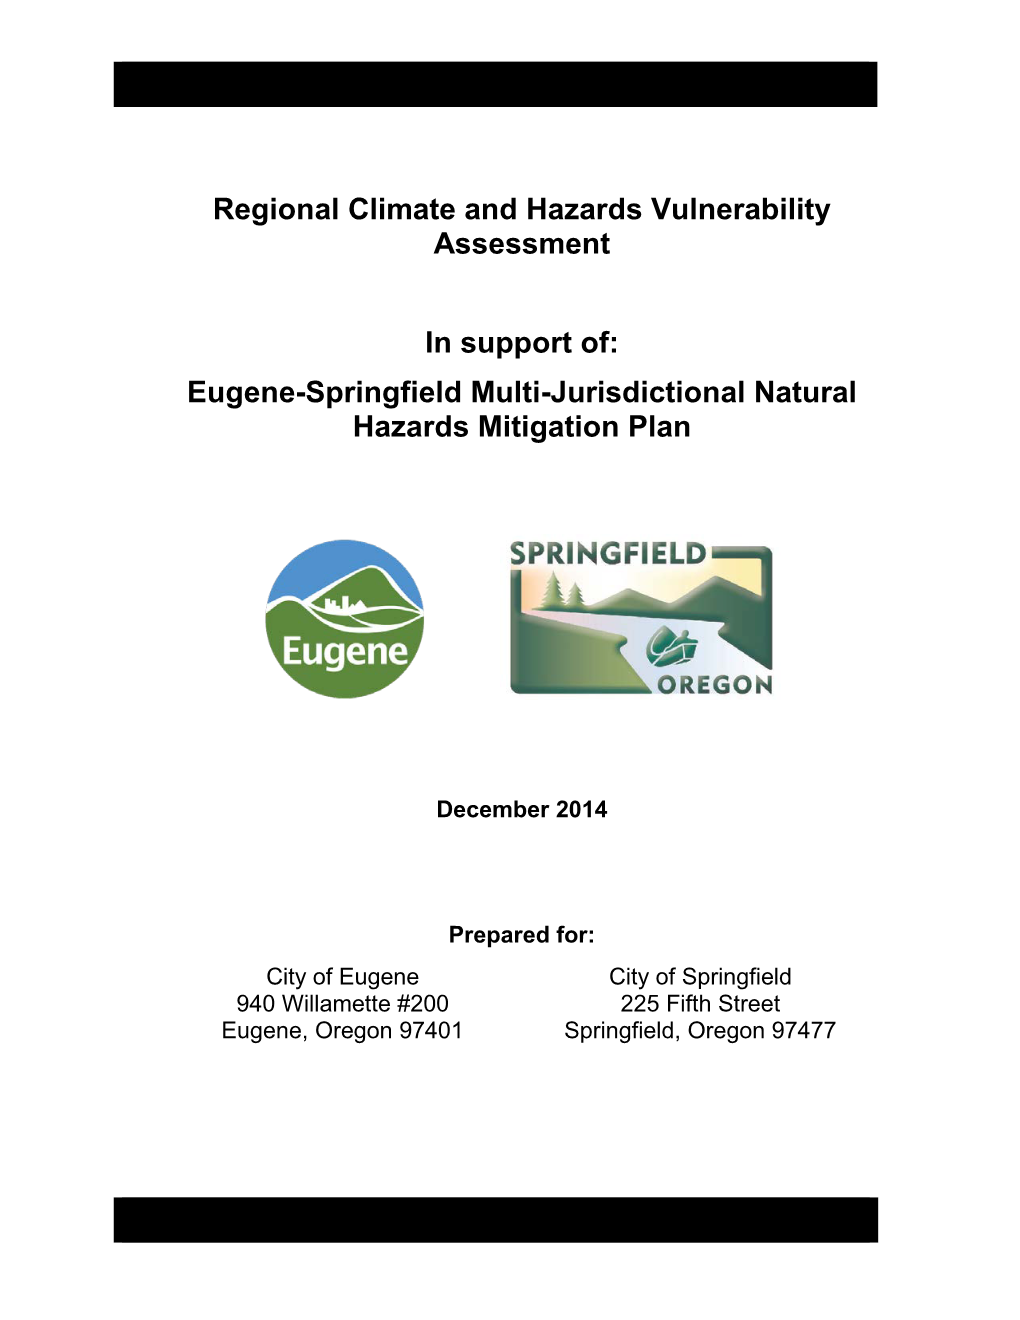 Eugene-Springfield Climate and Hazards Vulnerability Assessment